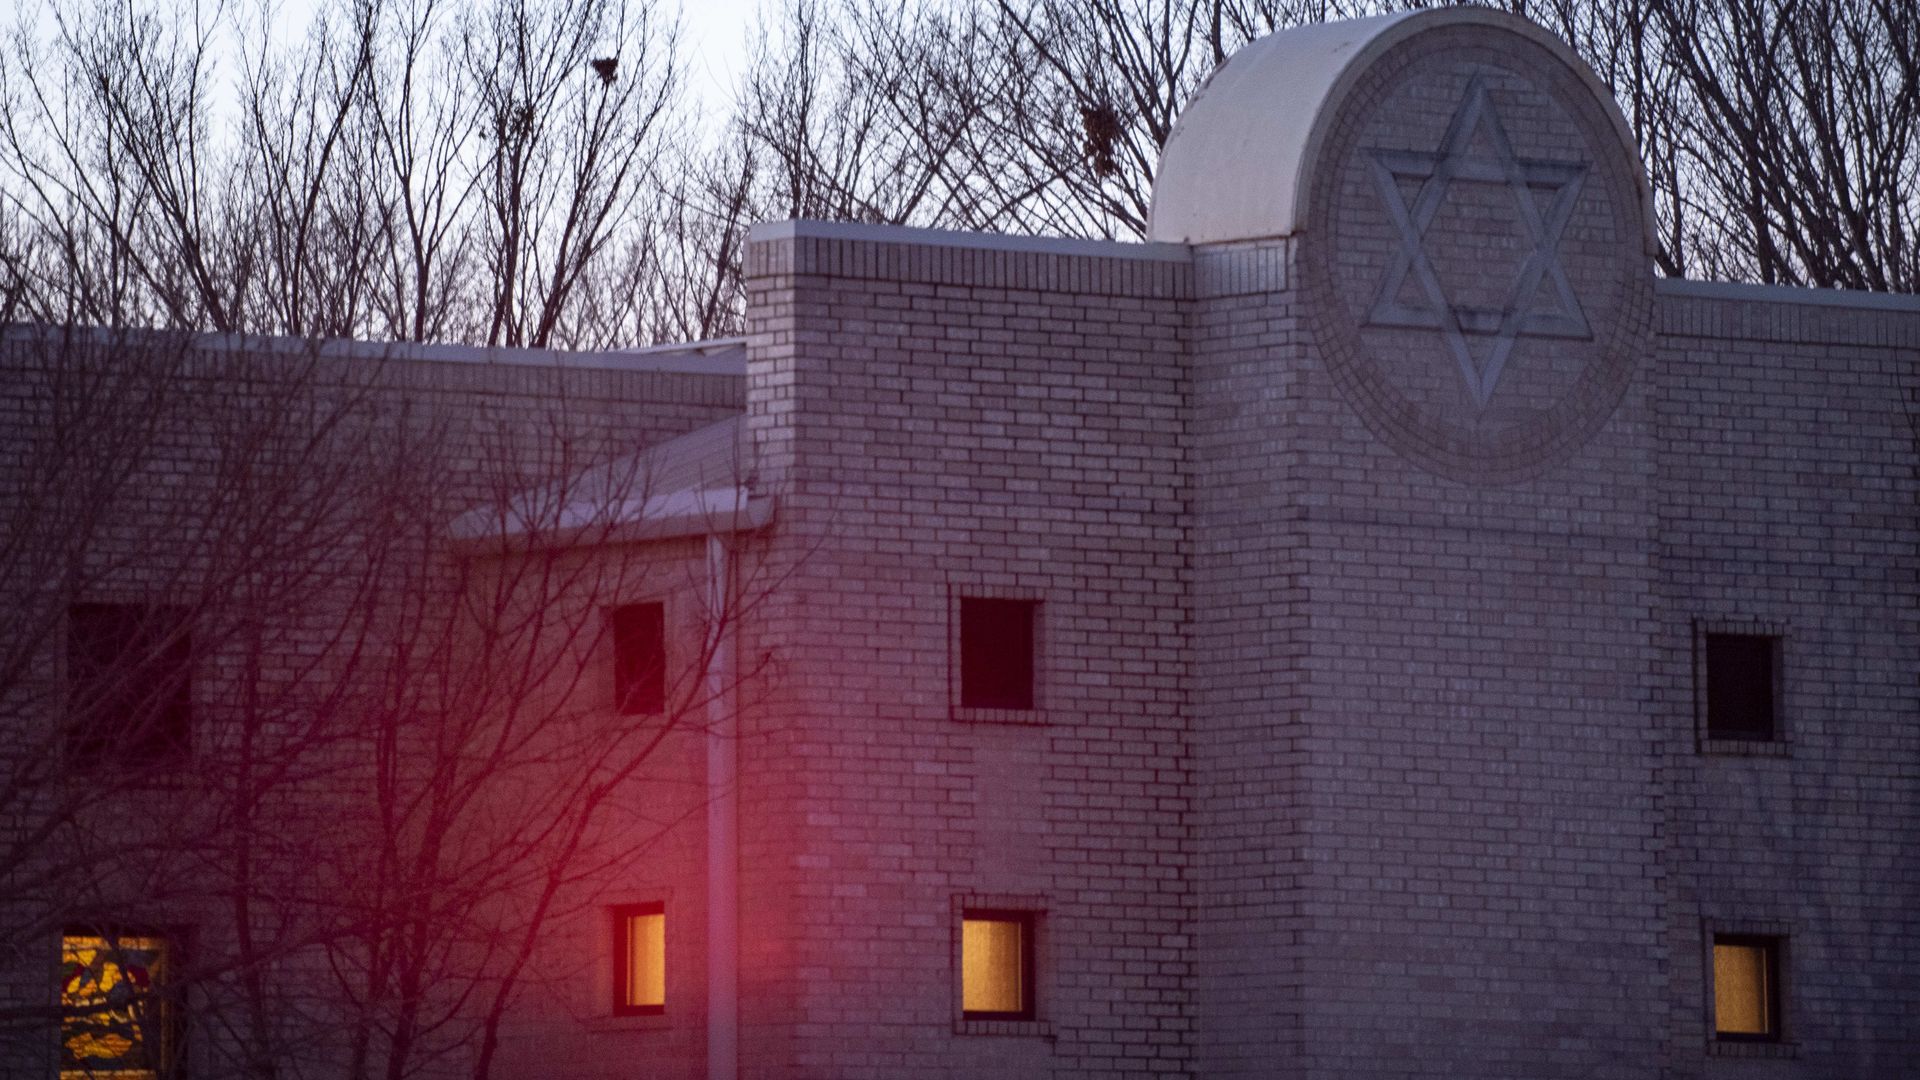 Congregation Beth Israel synagogue, the scene of the hostage situation over the weekend, seen on Jan. 17.